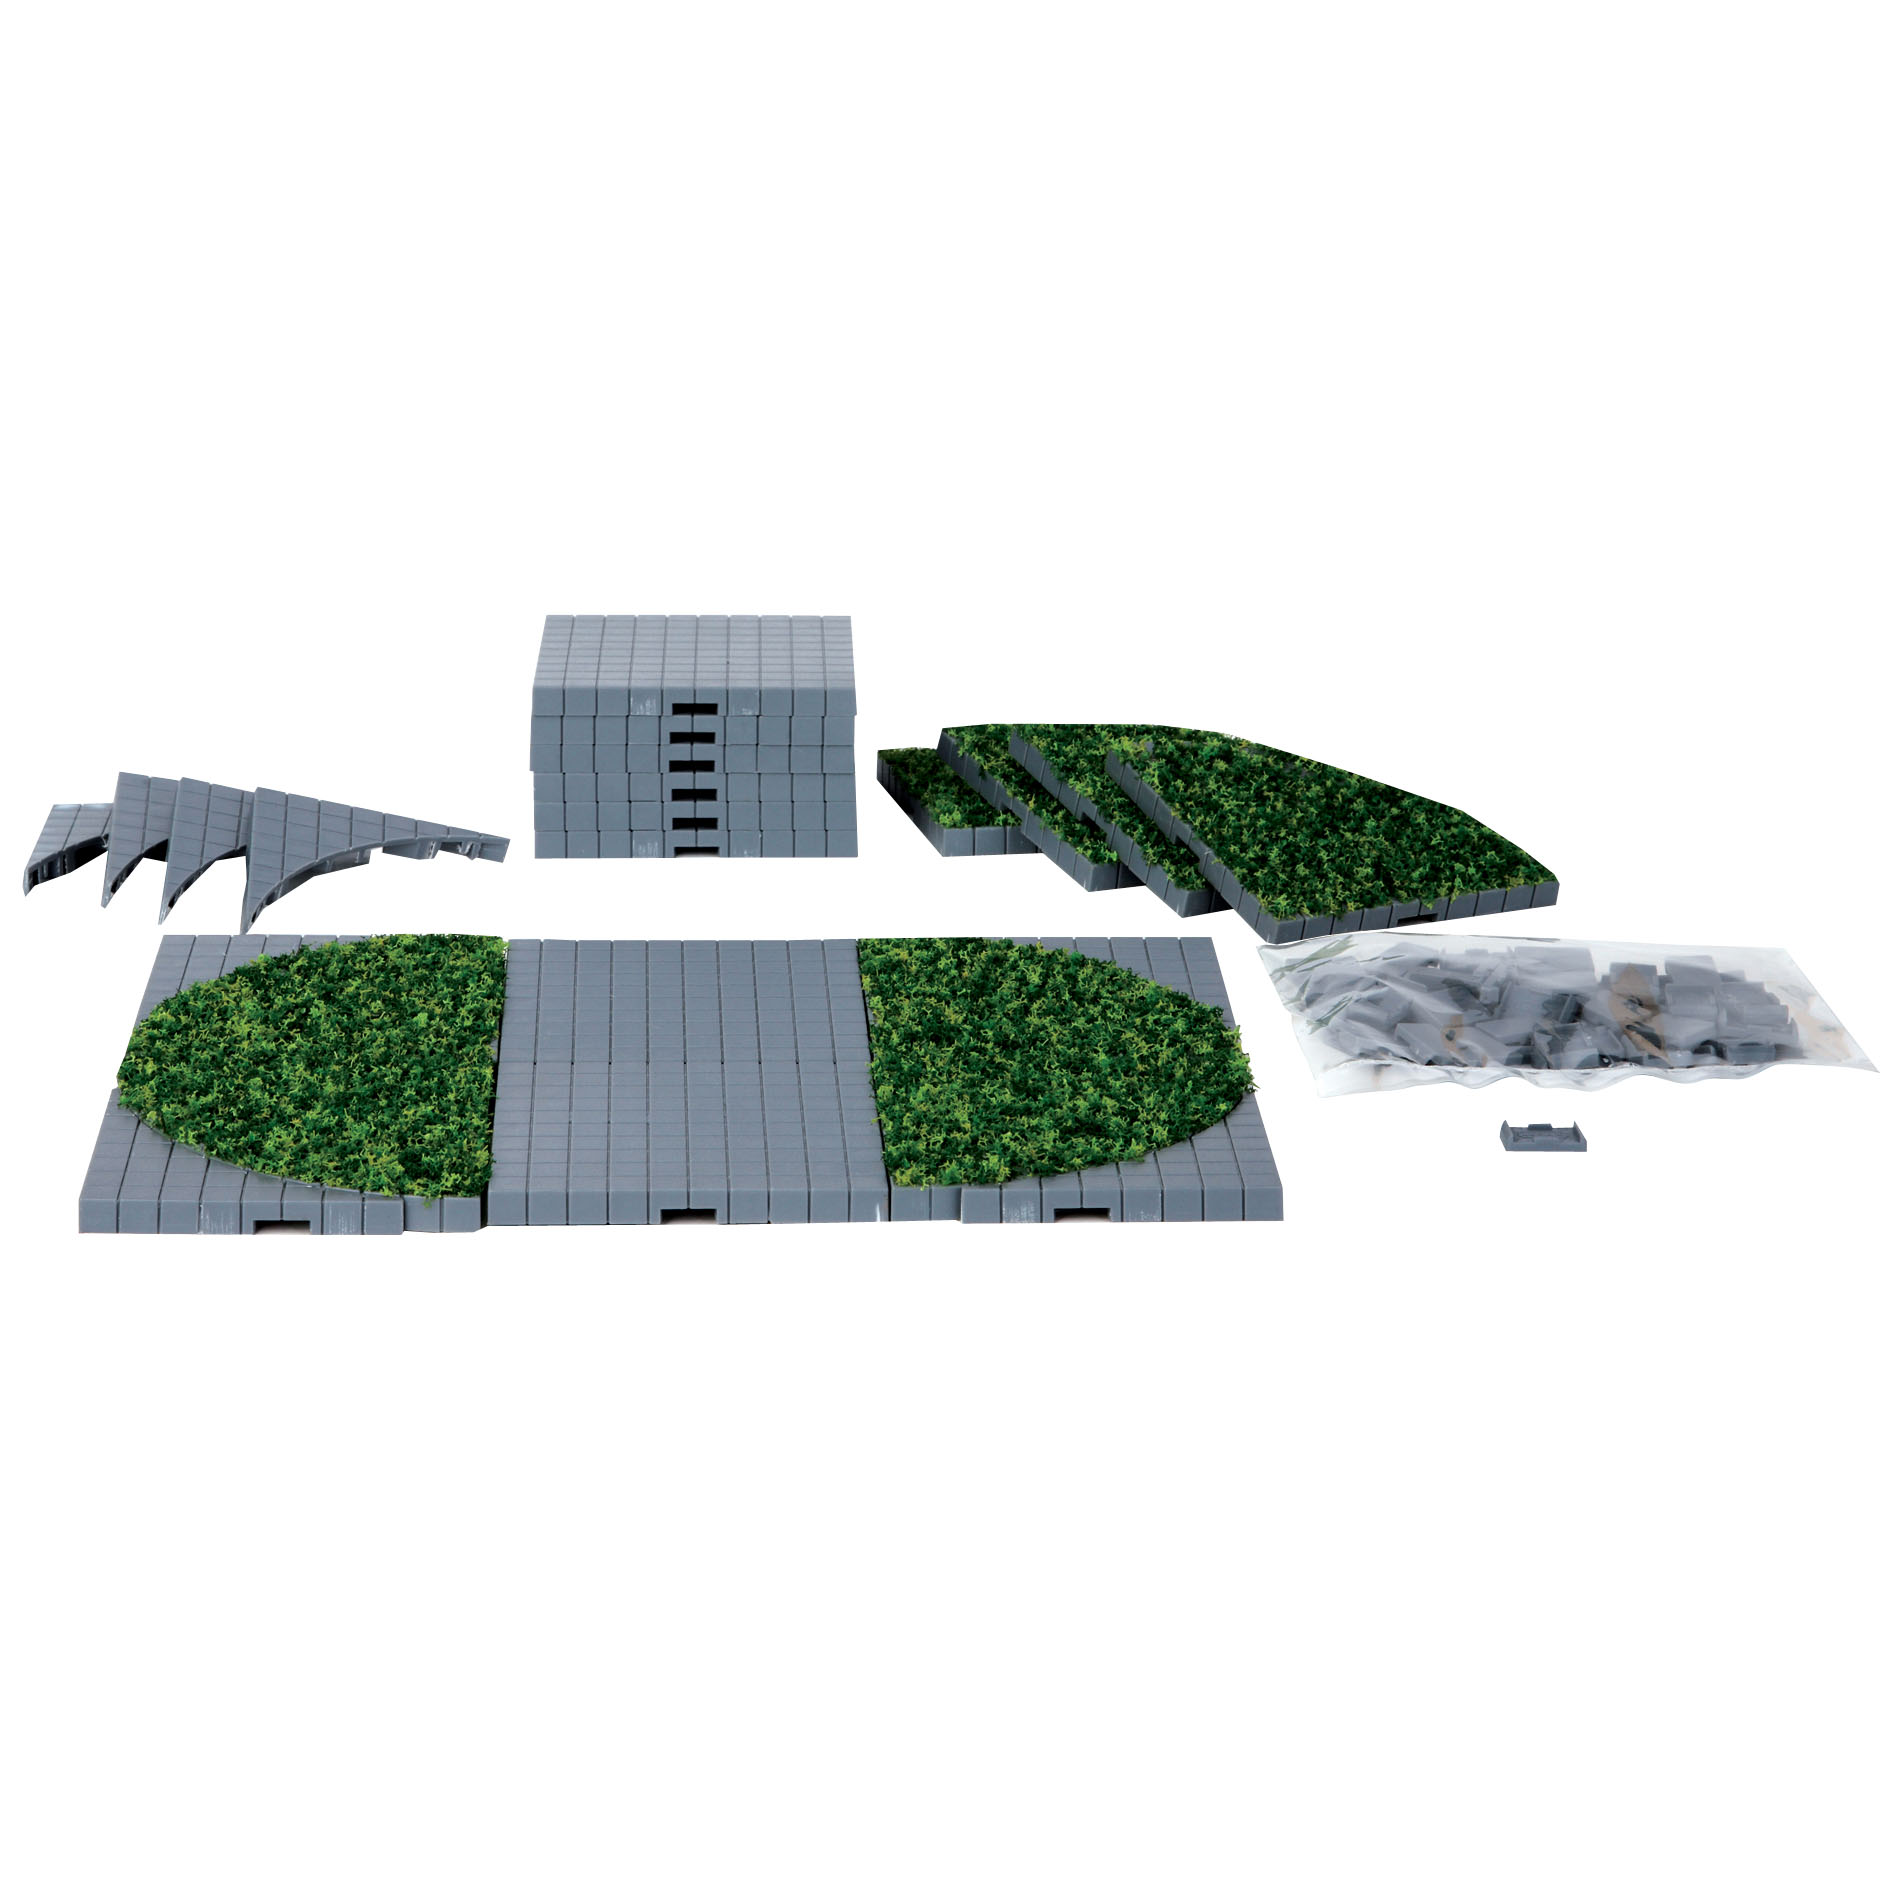 Lemax Village Collection Christmas Village Accessory, Plaza System (Grey, Round Grass) - 24 Pcs